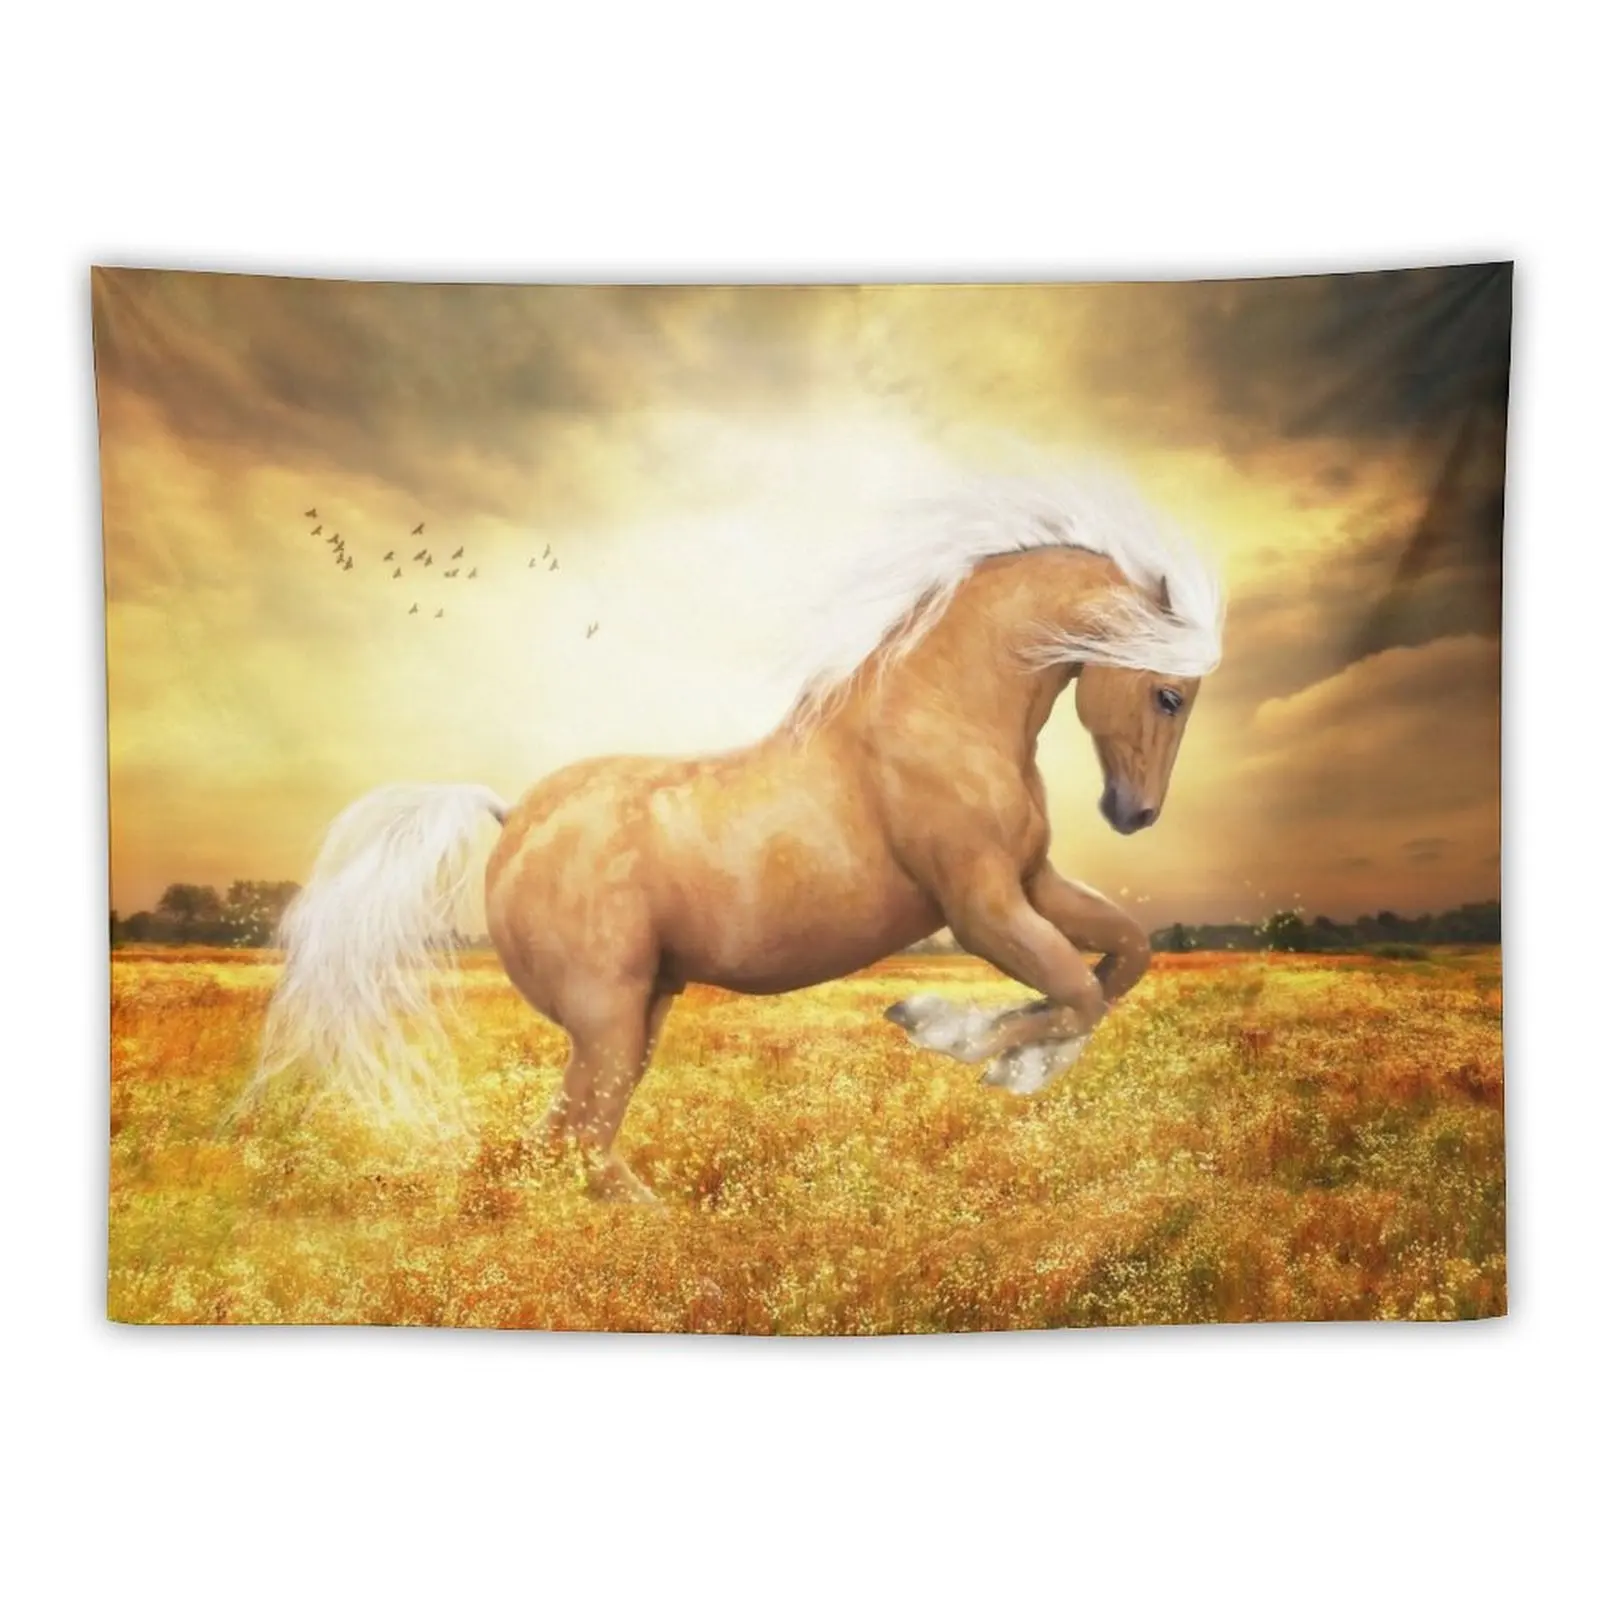 

Palomino Horse Sundance Tapestry Hanging Wall Tapestry Things To The Room Tapete For The Wall Mushroom Tapestry